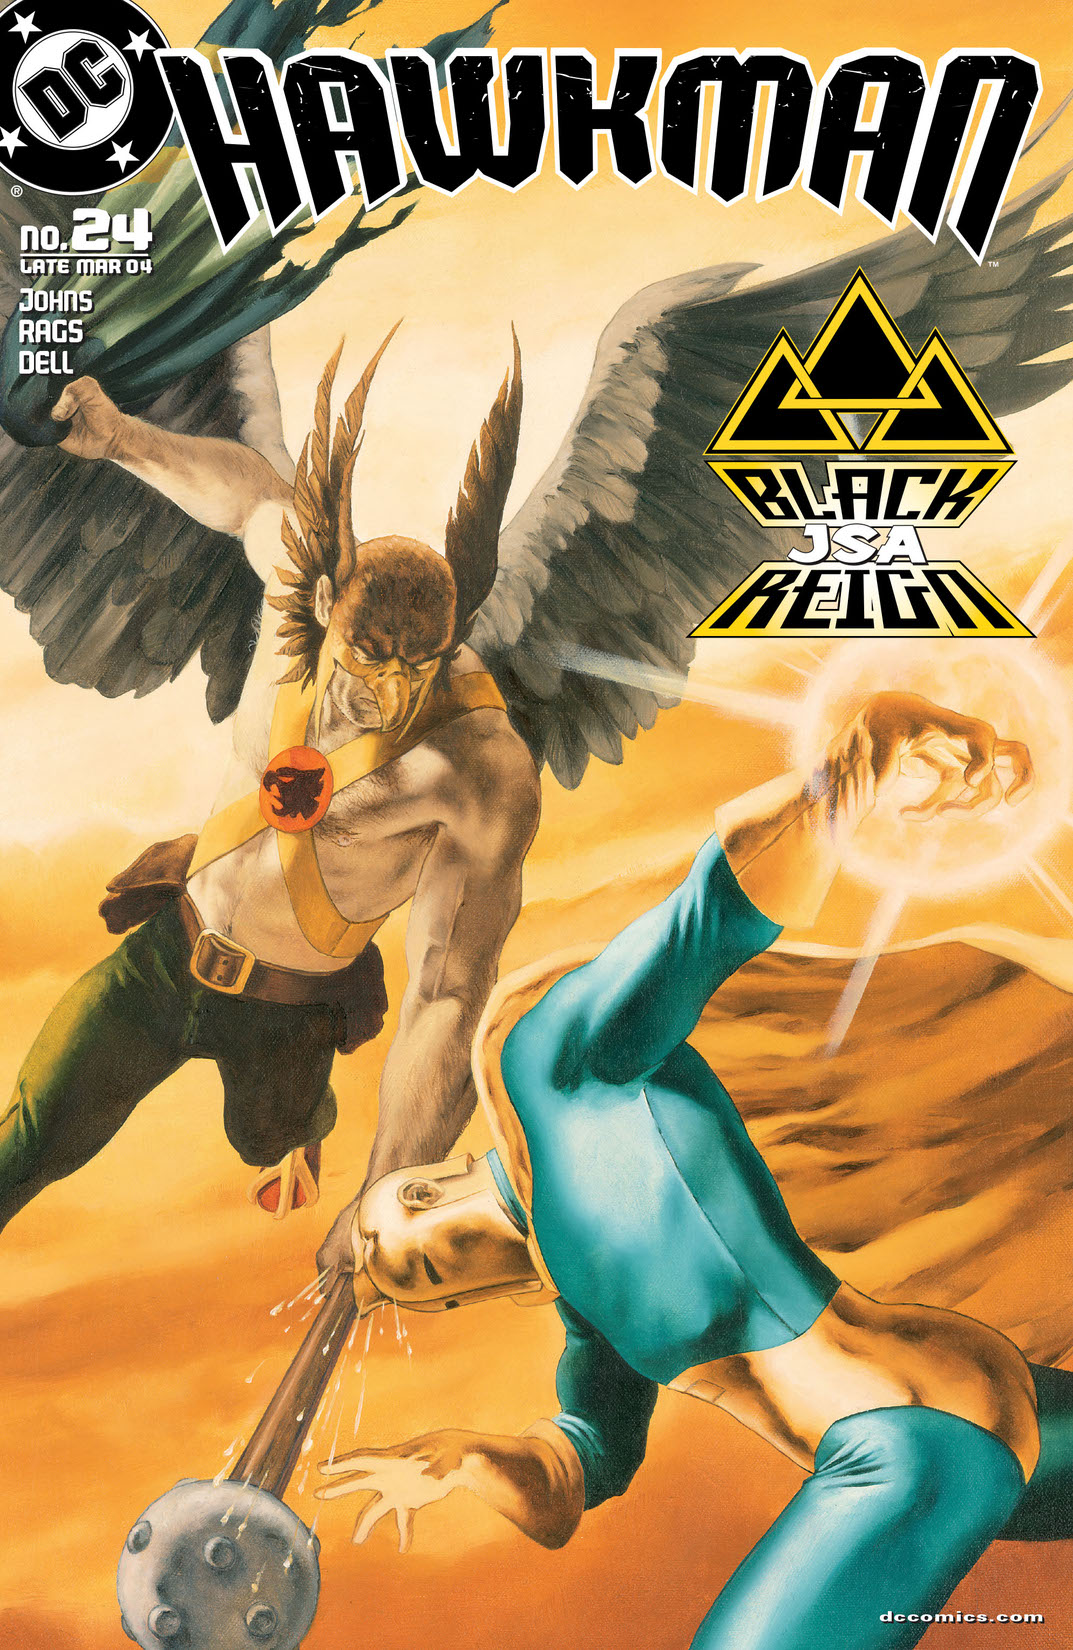 Hawkman (2002-) #24 preview images